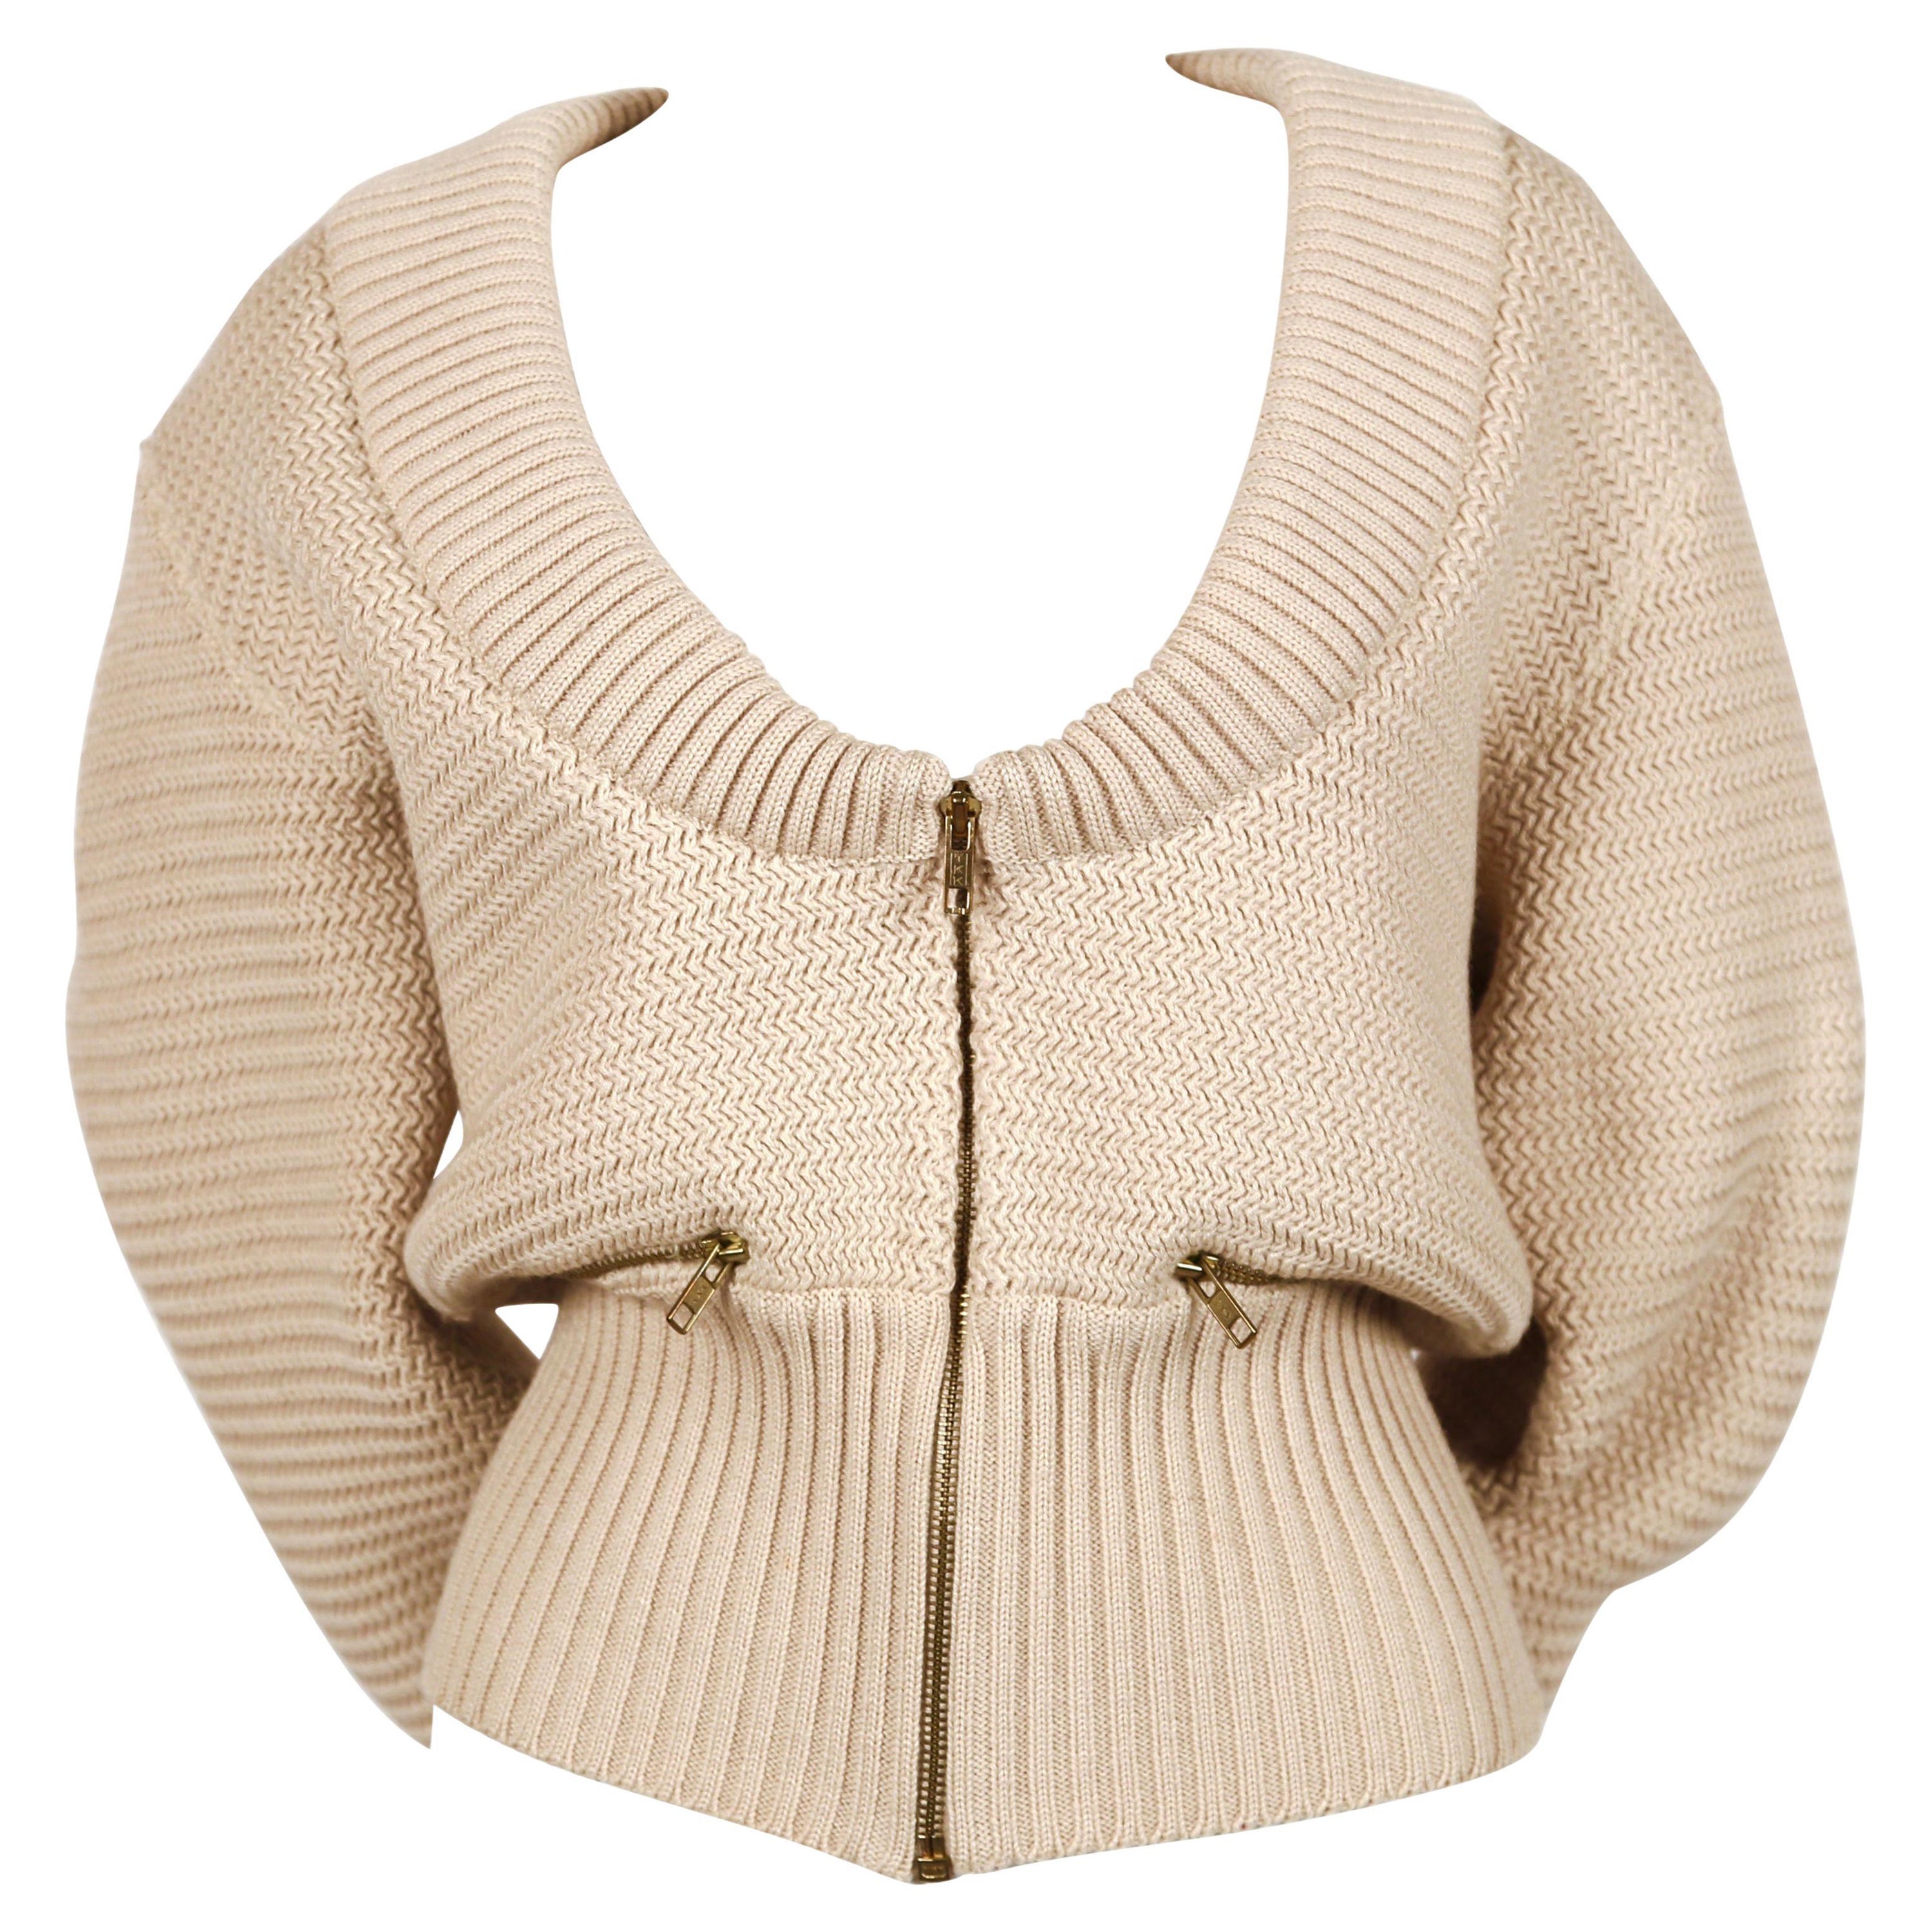 1986 AZZEDINE ALAIA heavy knit RUNWAY cardigan sweater coat with zippers For Sale